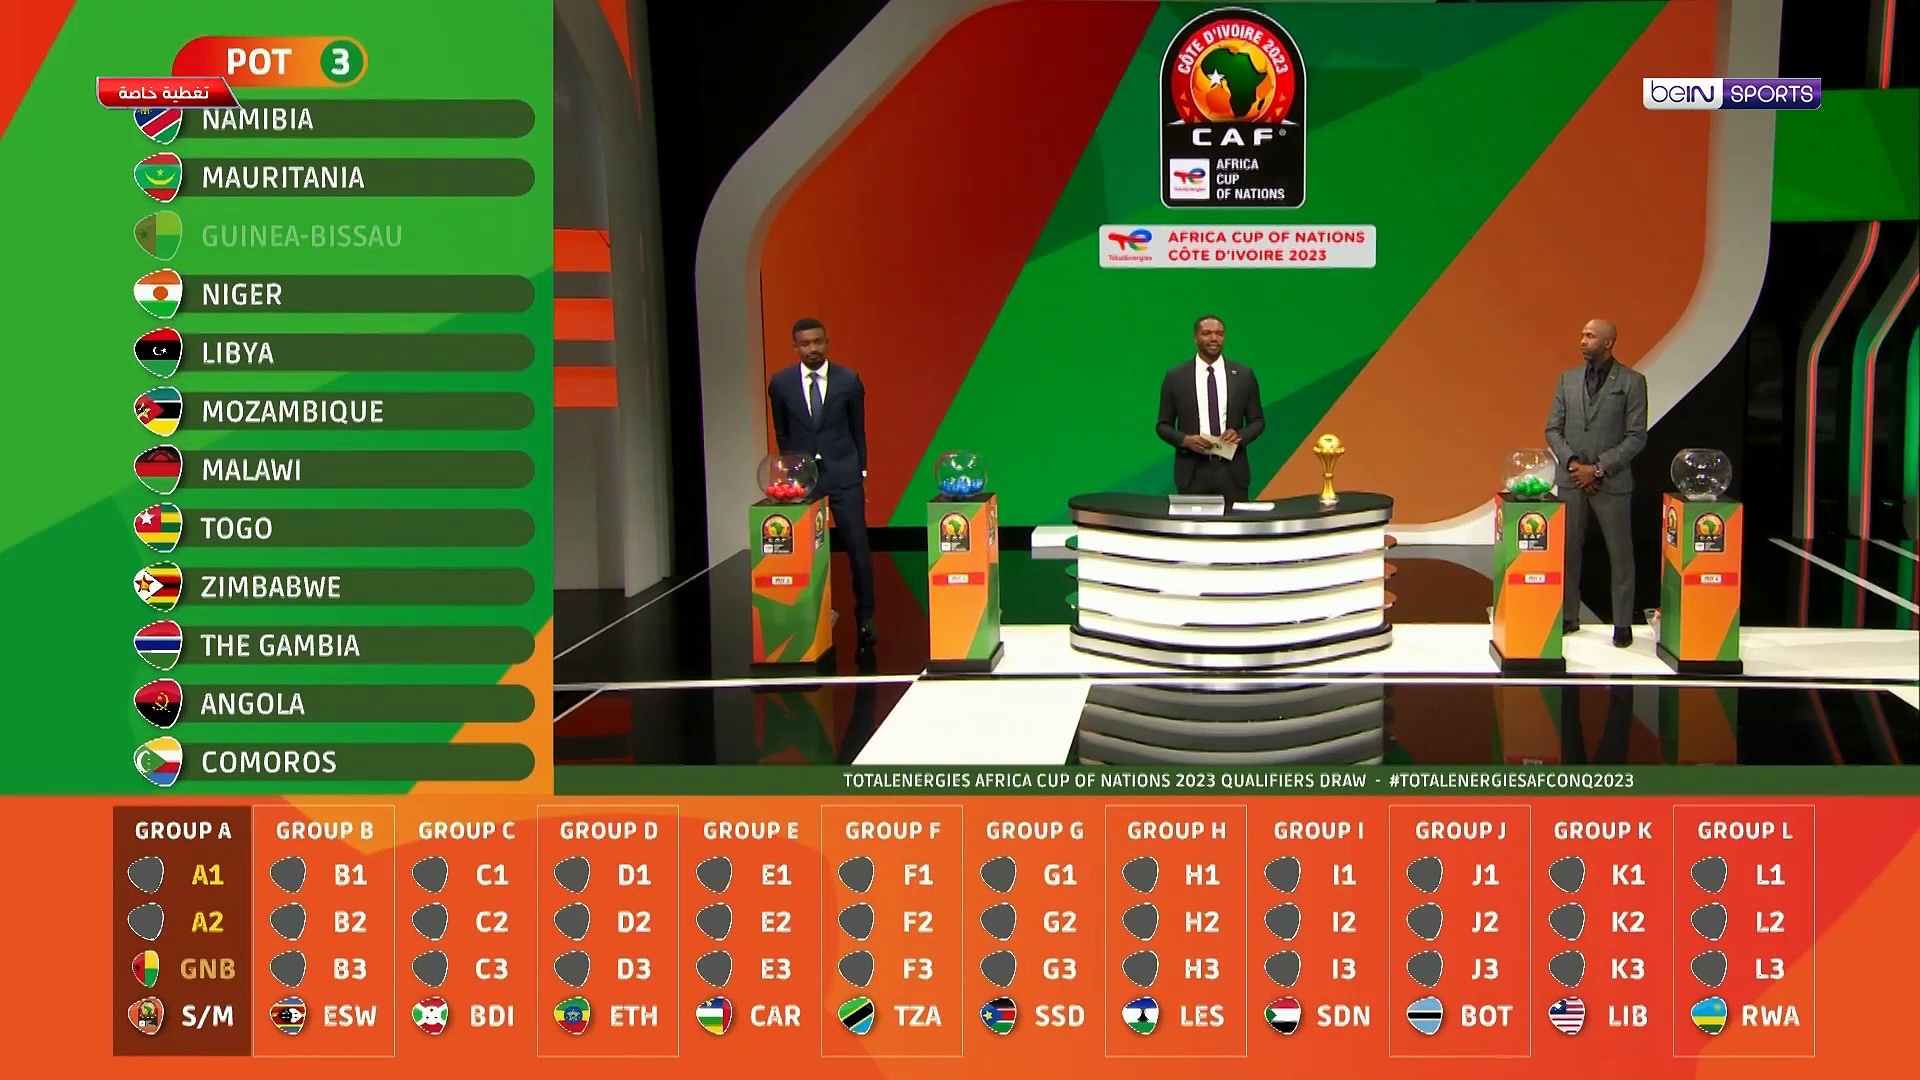 AFCON DRAW